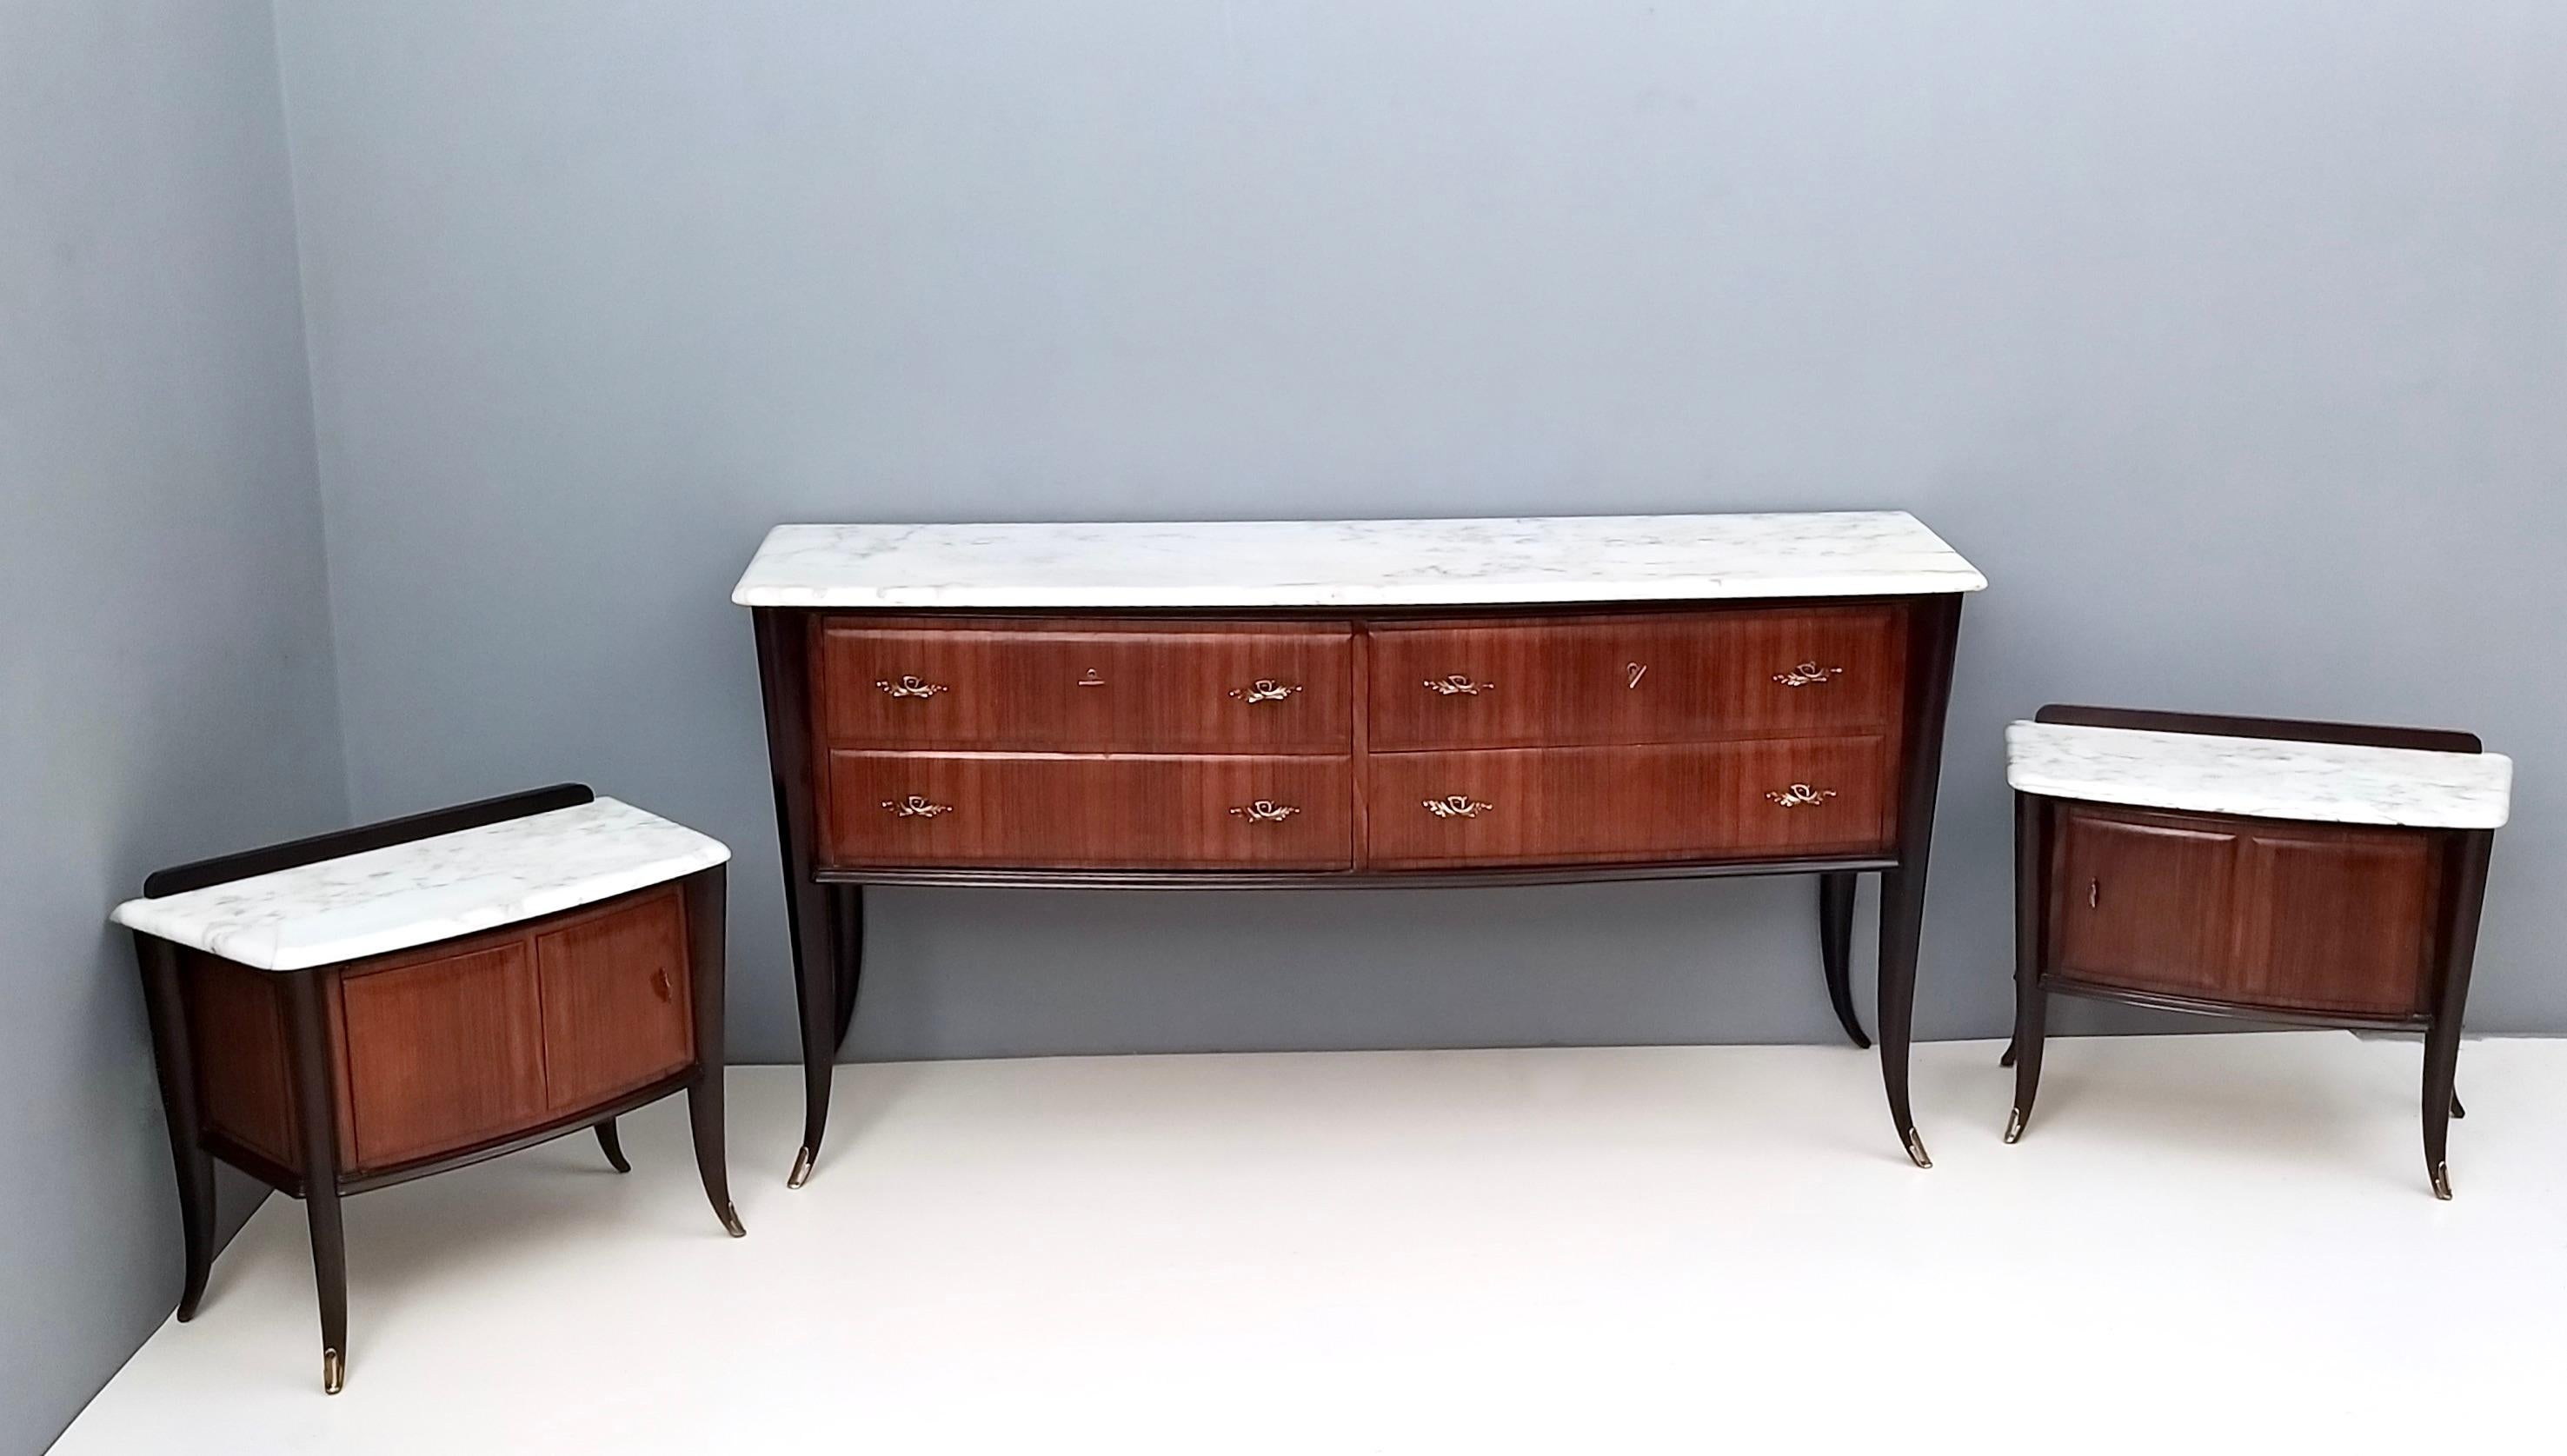 Vintage Black Walnut Dresser Produced by Dassi with Carrara Marble Top, Italy In Good Condition For Sale In Bresso, Lombardy